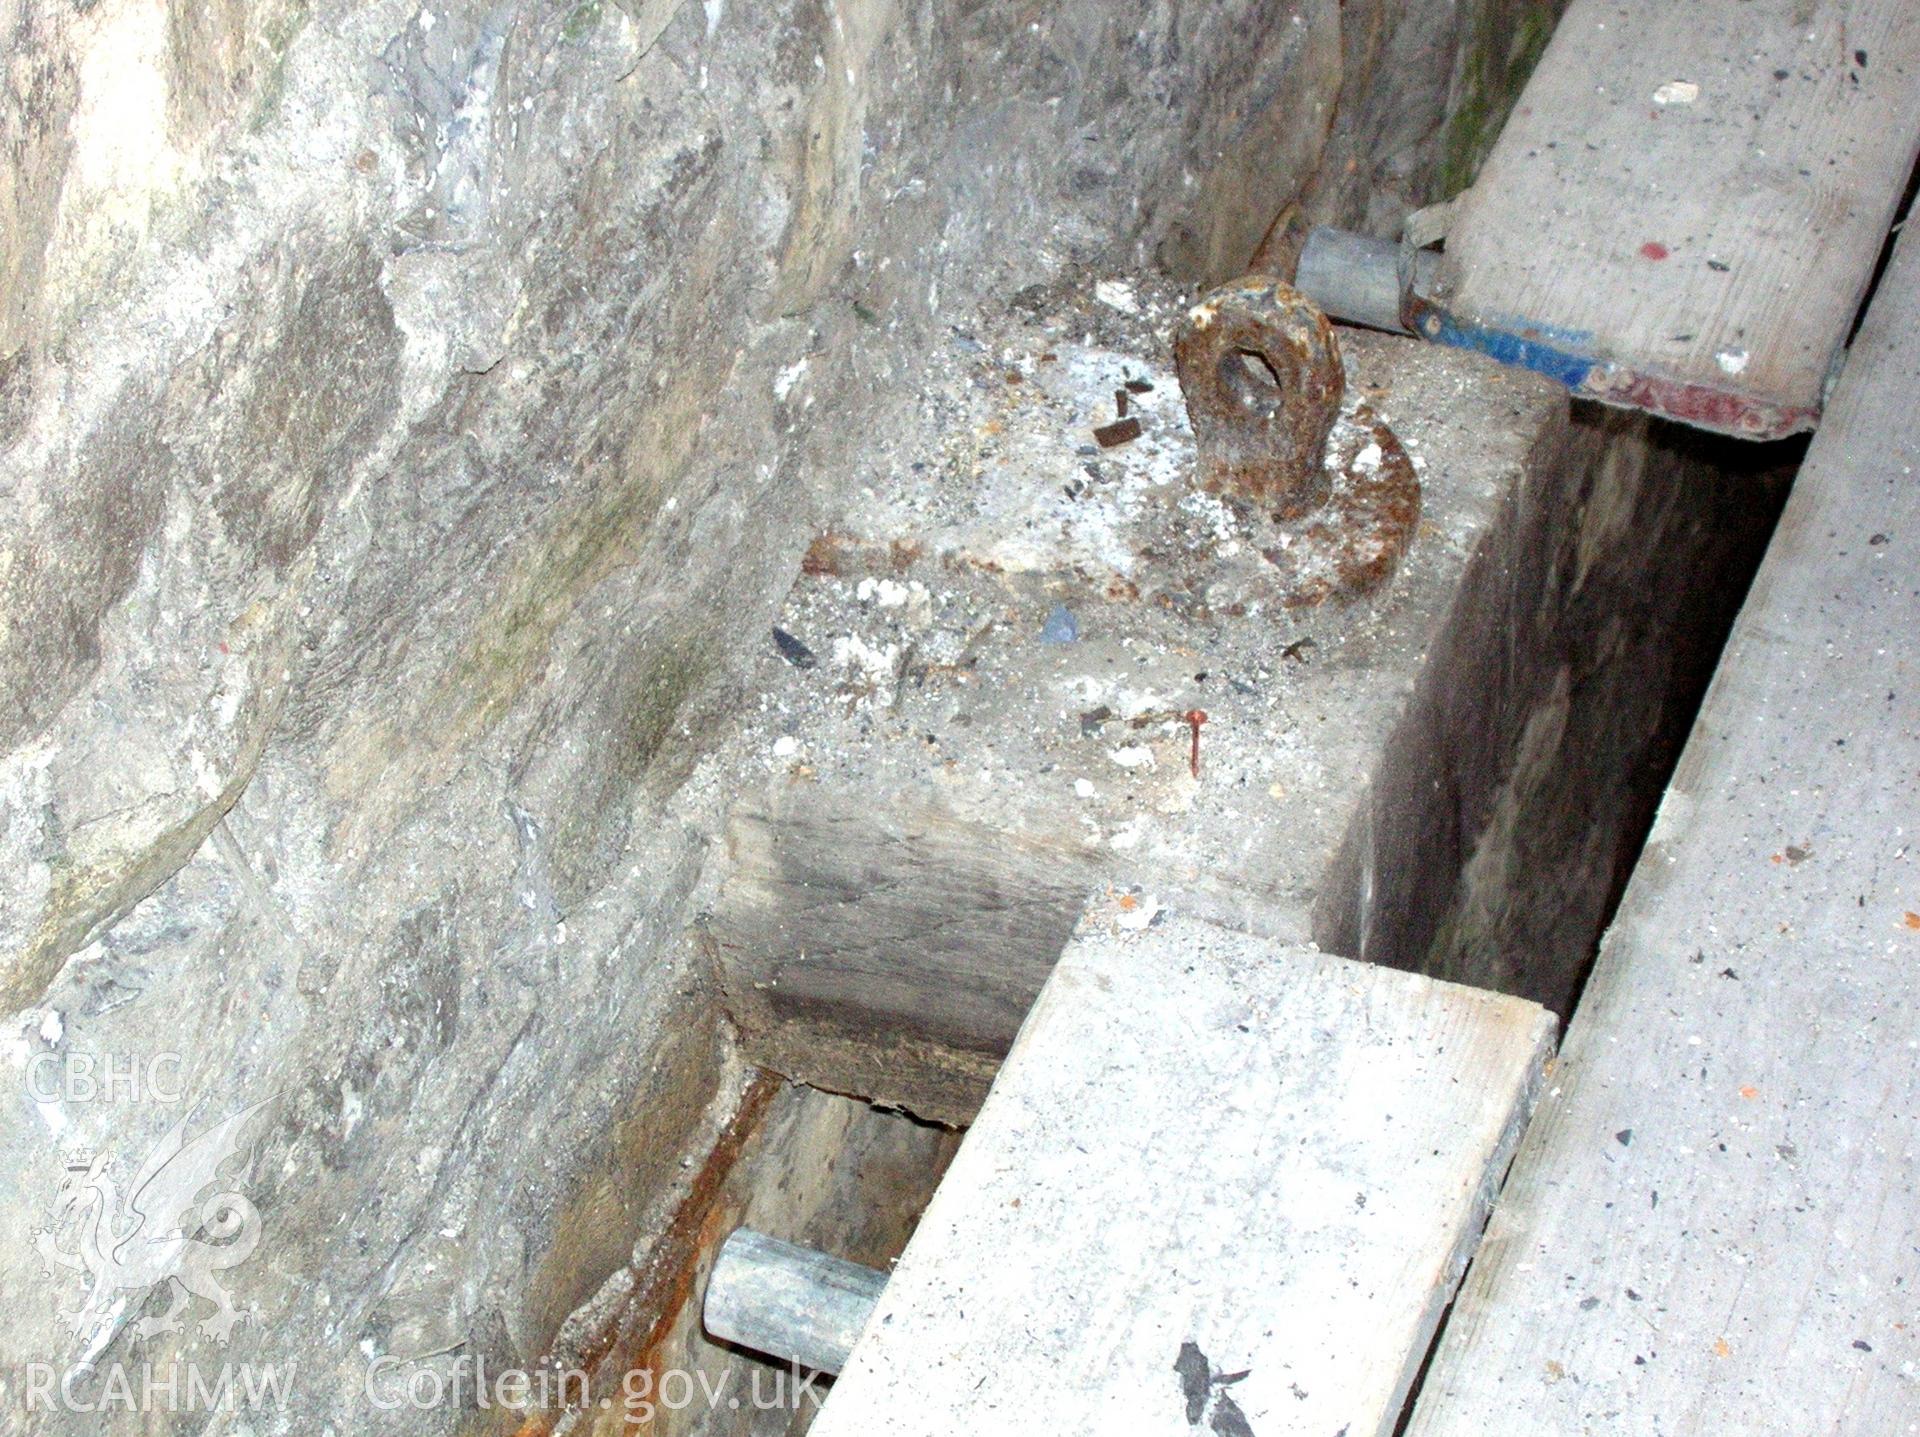 Colour photo showing attachment point near the roof, inside the Clive Engine House, Talar Goch Mine, produced by C.J. Williams, 2012.